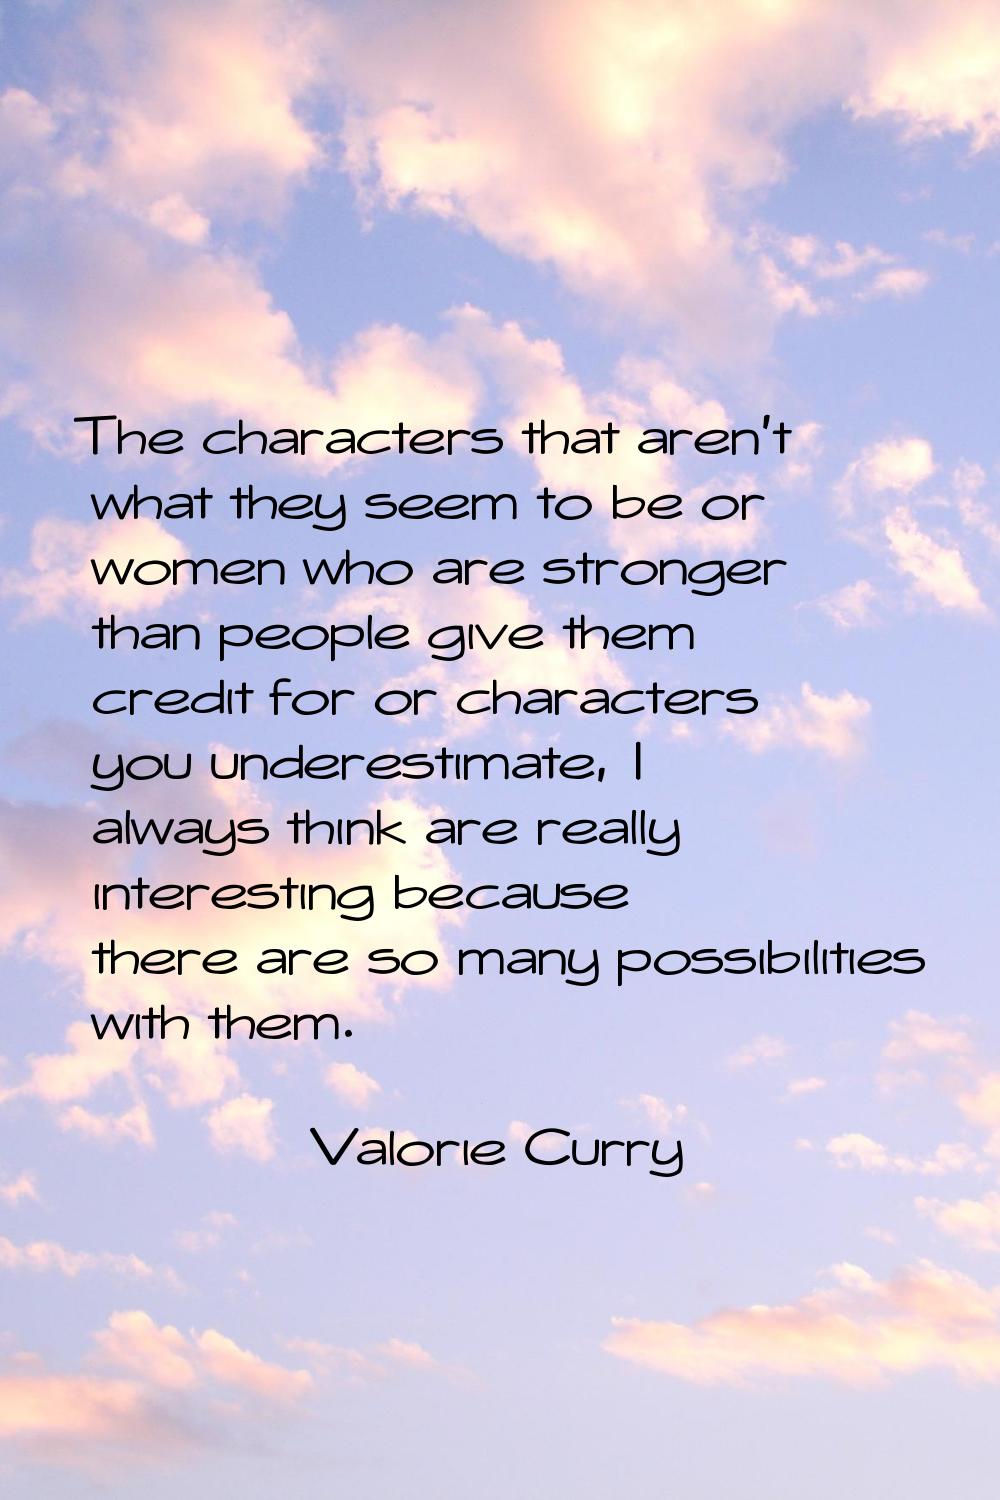 The characters that aren't what they seem to be or women who are stronger than people give them cre